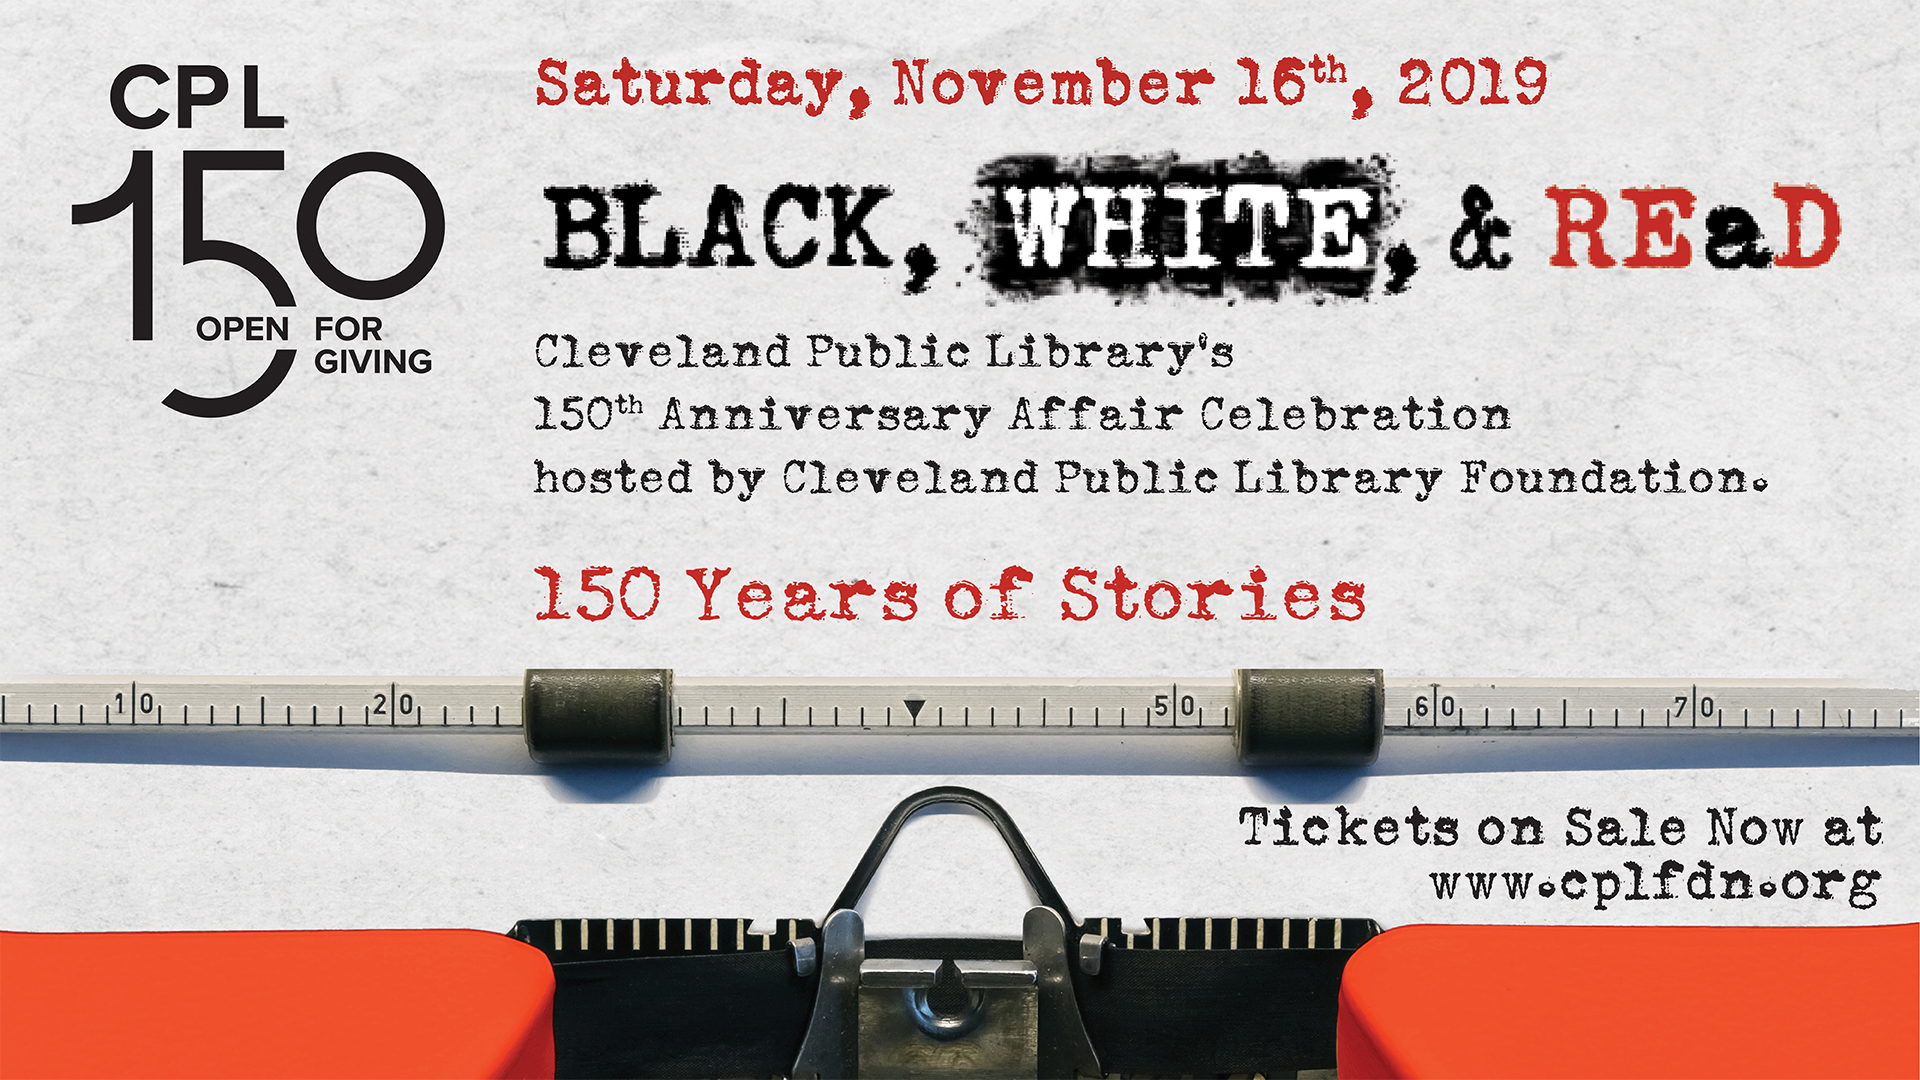 Cleveland Public Library Foundation Presents Black White and REaD Anniversary Affair